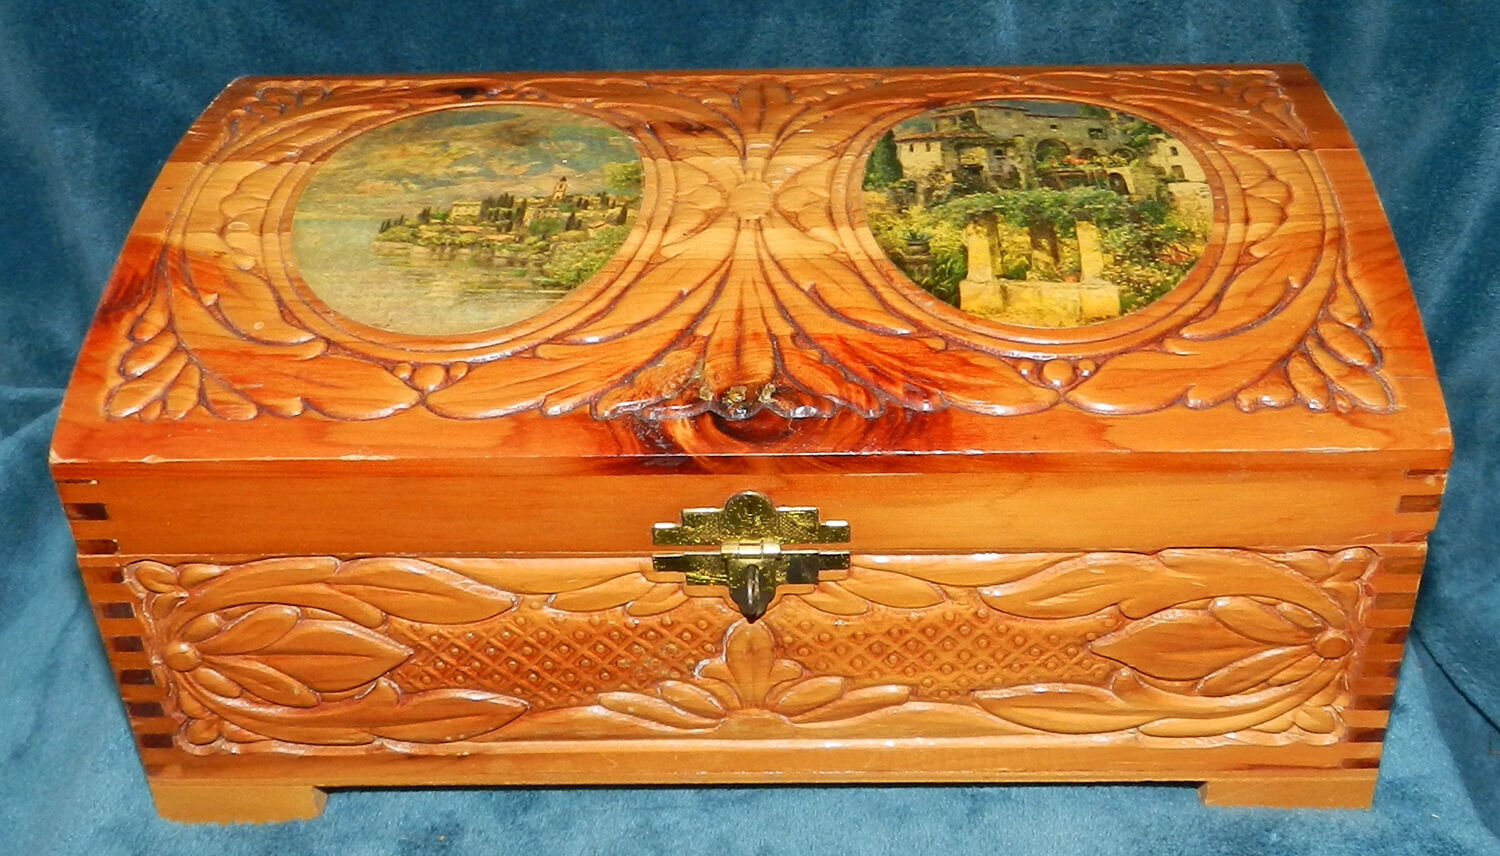 LOVELY ANTIQUE VINTAGE CARVED WOOD HINGED JEWELRY BOX WITH MIRROR 